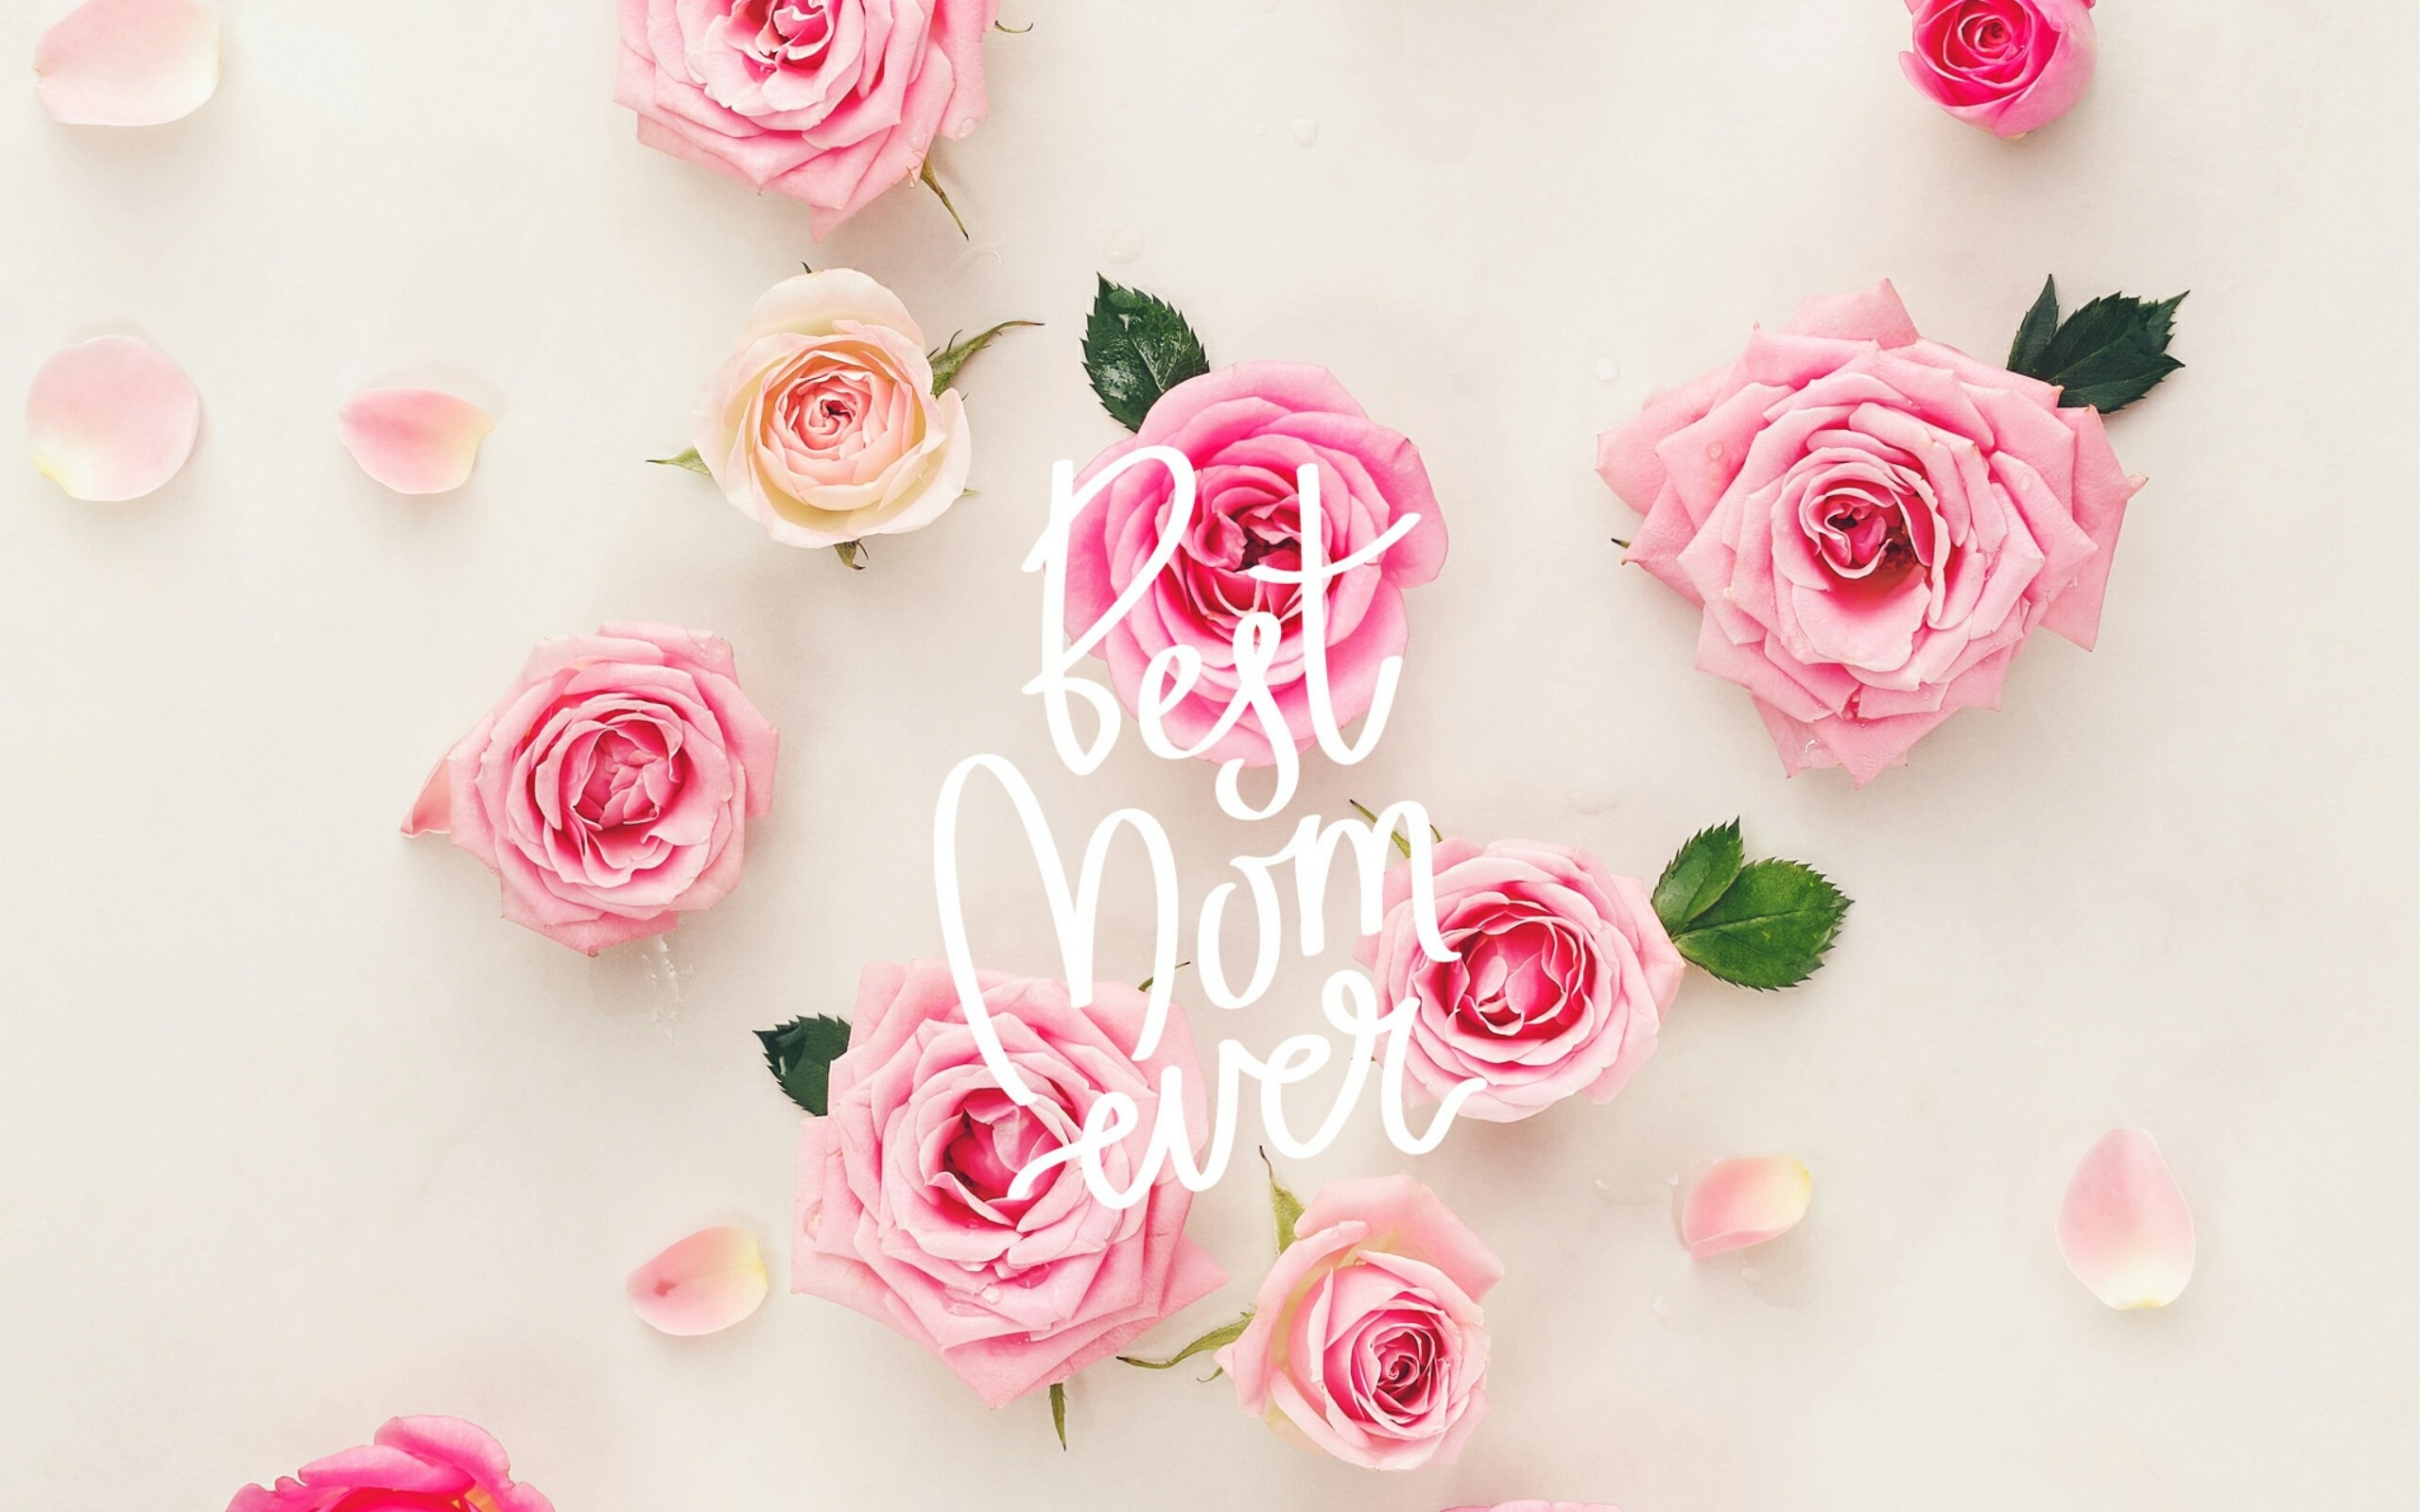 Download wallpaper Best mom ever, Mothers Day, May pink roses, floral background, congratulations for mom for desktop with resolution 2560x1600. High Quality HD picture wallpaper